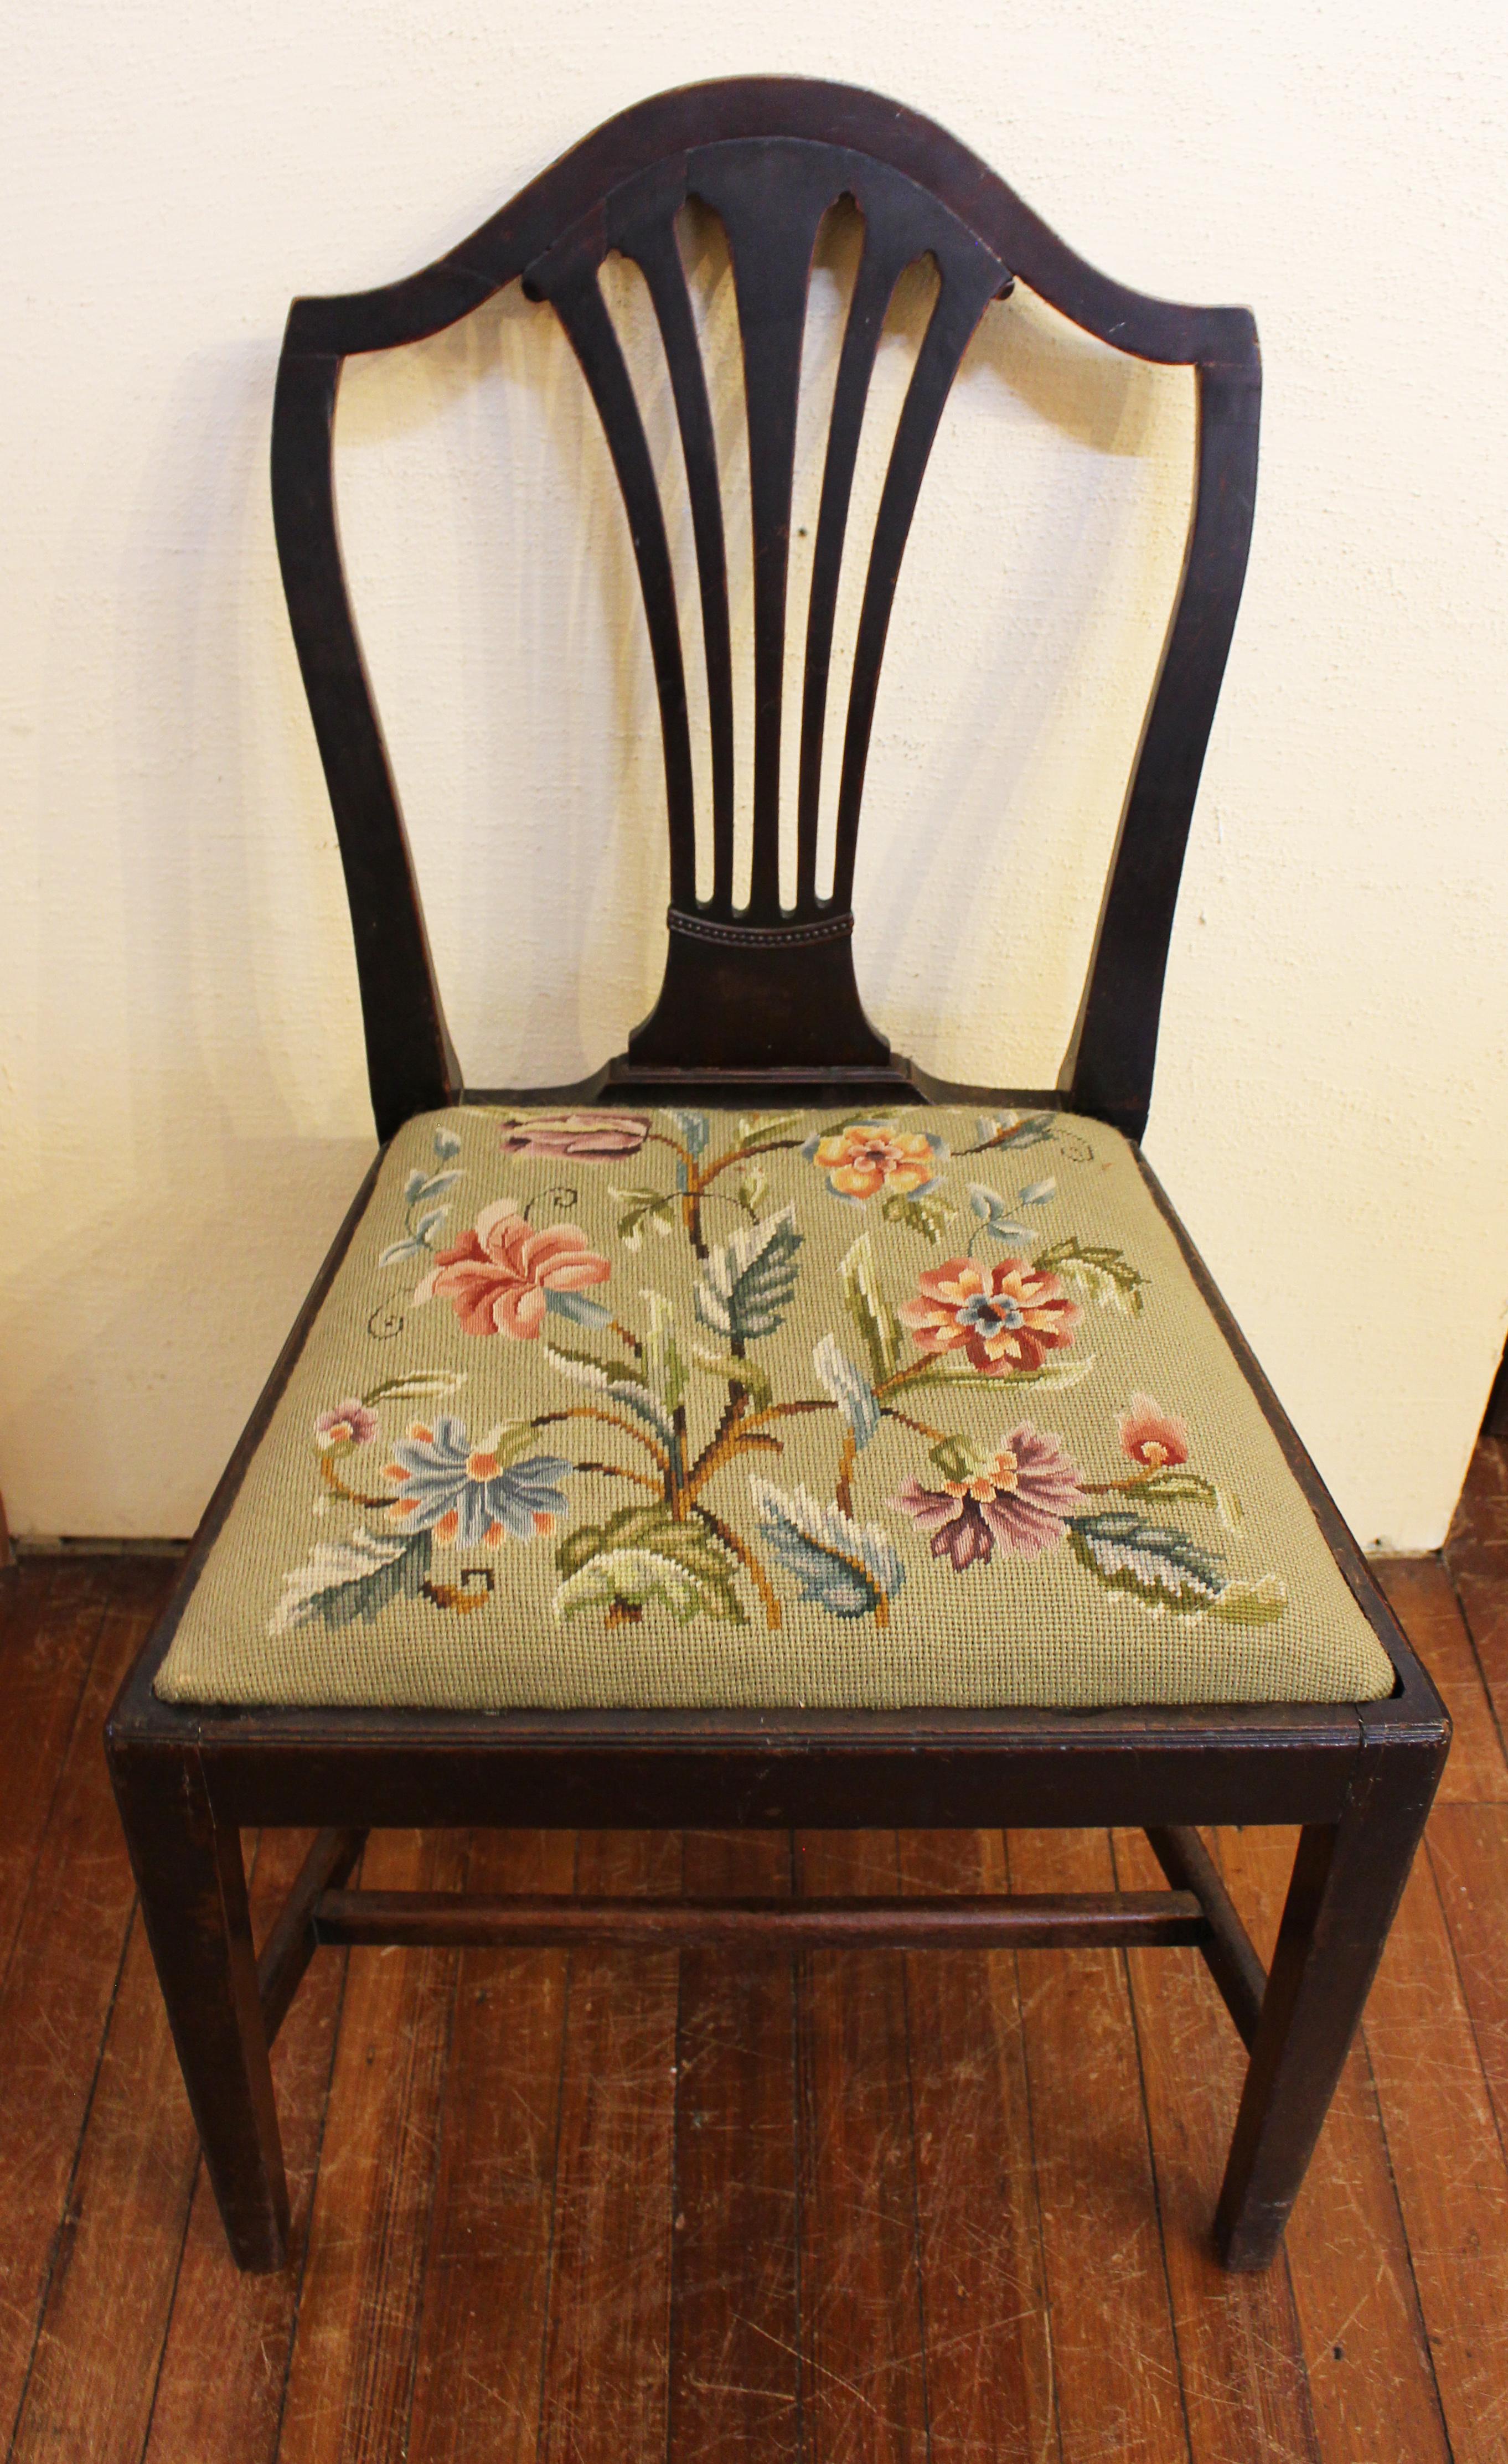 Late 18th century side chair. English, George III. Well molded, shaped back with pierced backsplat. Blackened through patination mahogany. Needlepoint slip seat. Straight, tapered legs & stretchers. 36 1/2